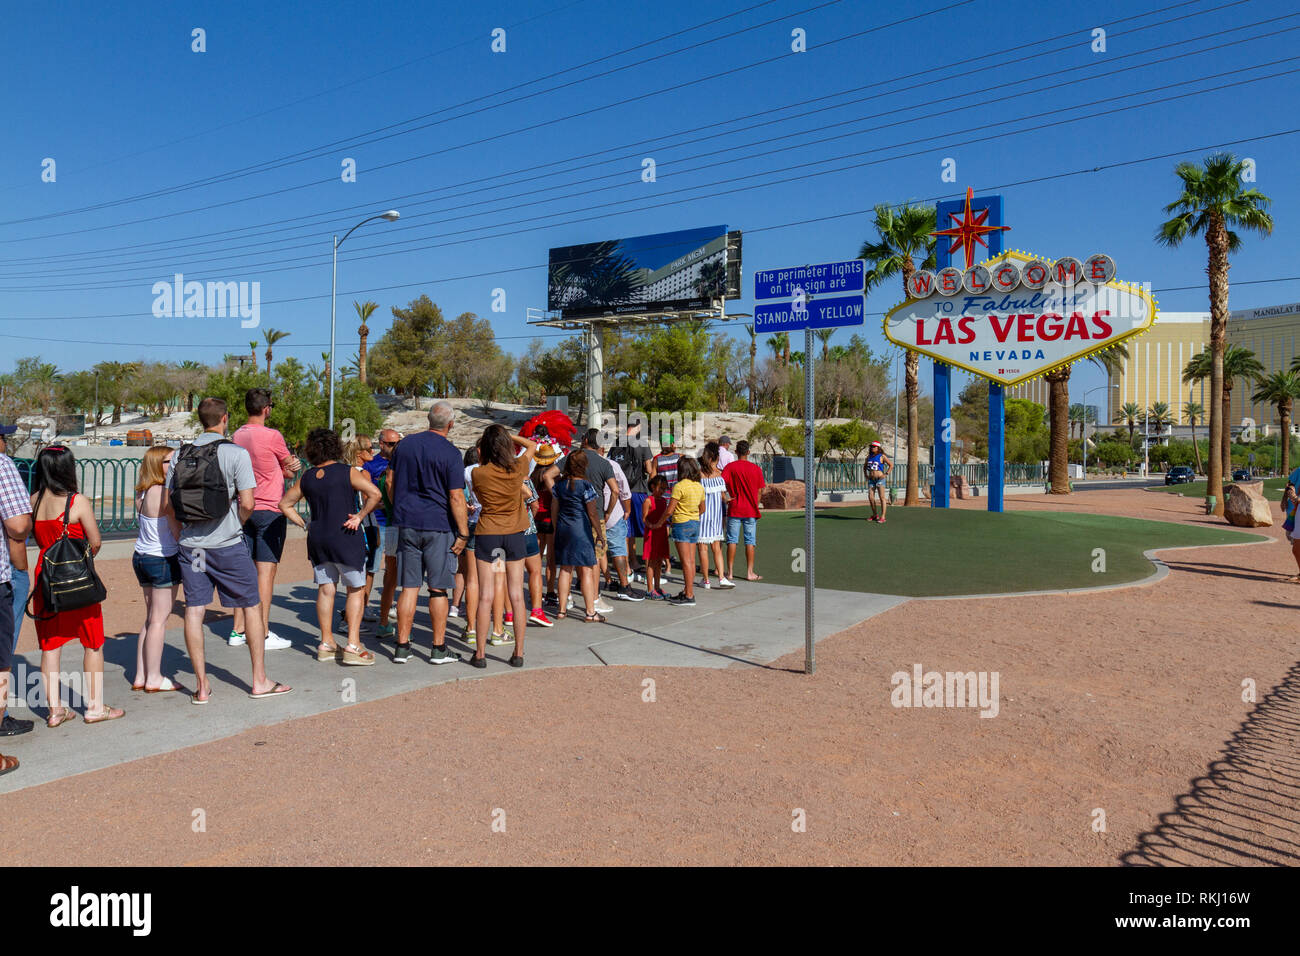 Line of visitors waiting to take a photograph in front of the famous "Welcome to Fabulous Las Vegas" sign, Las Vegas, Nevada, United States. Stock Photo